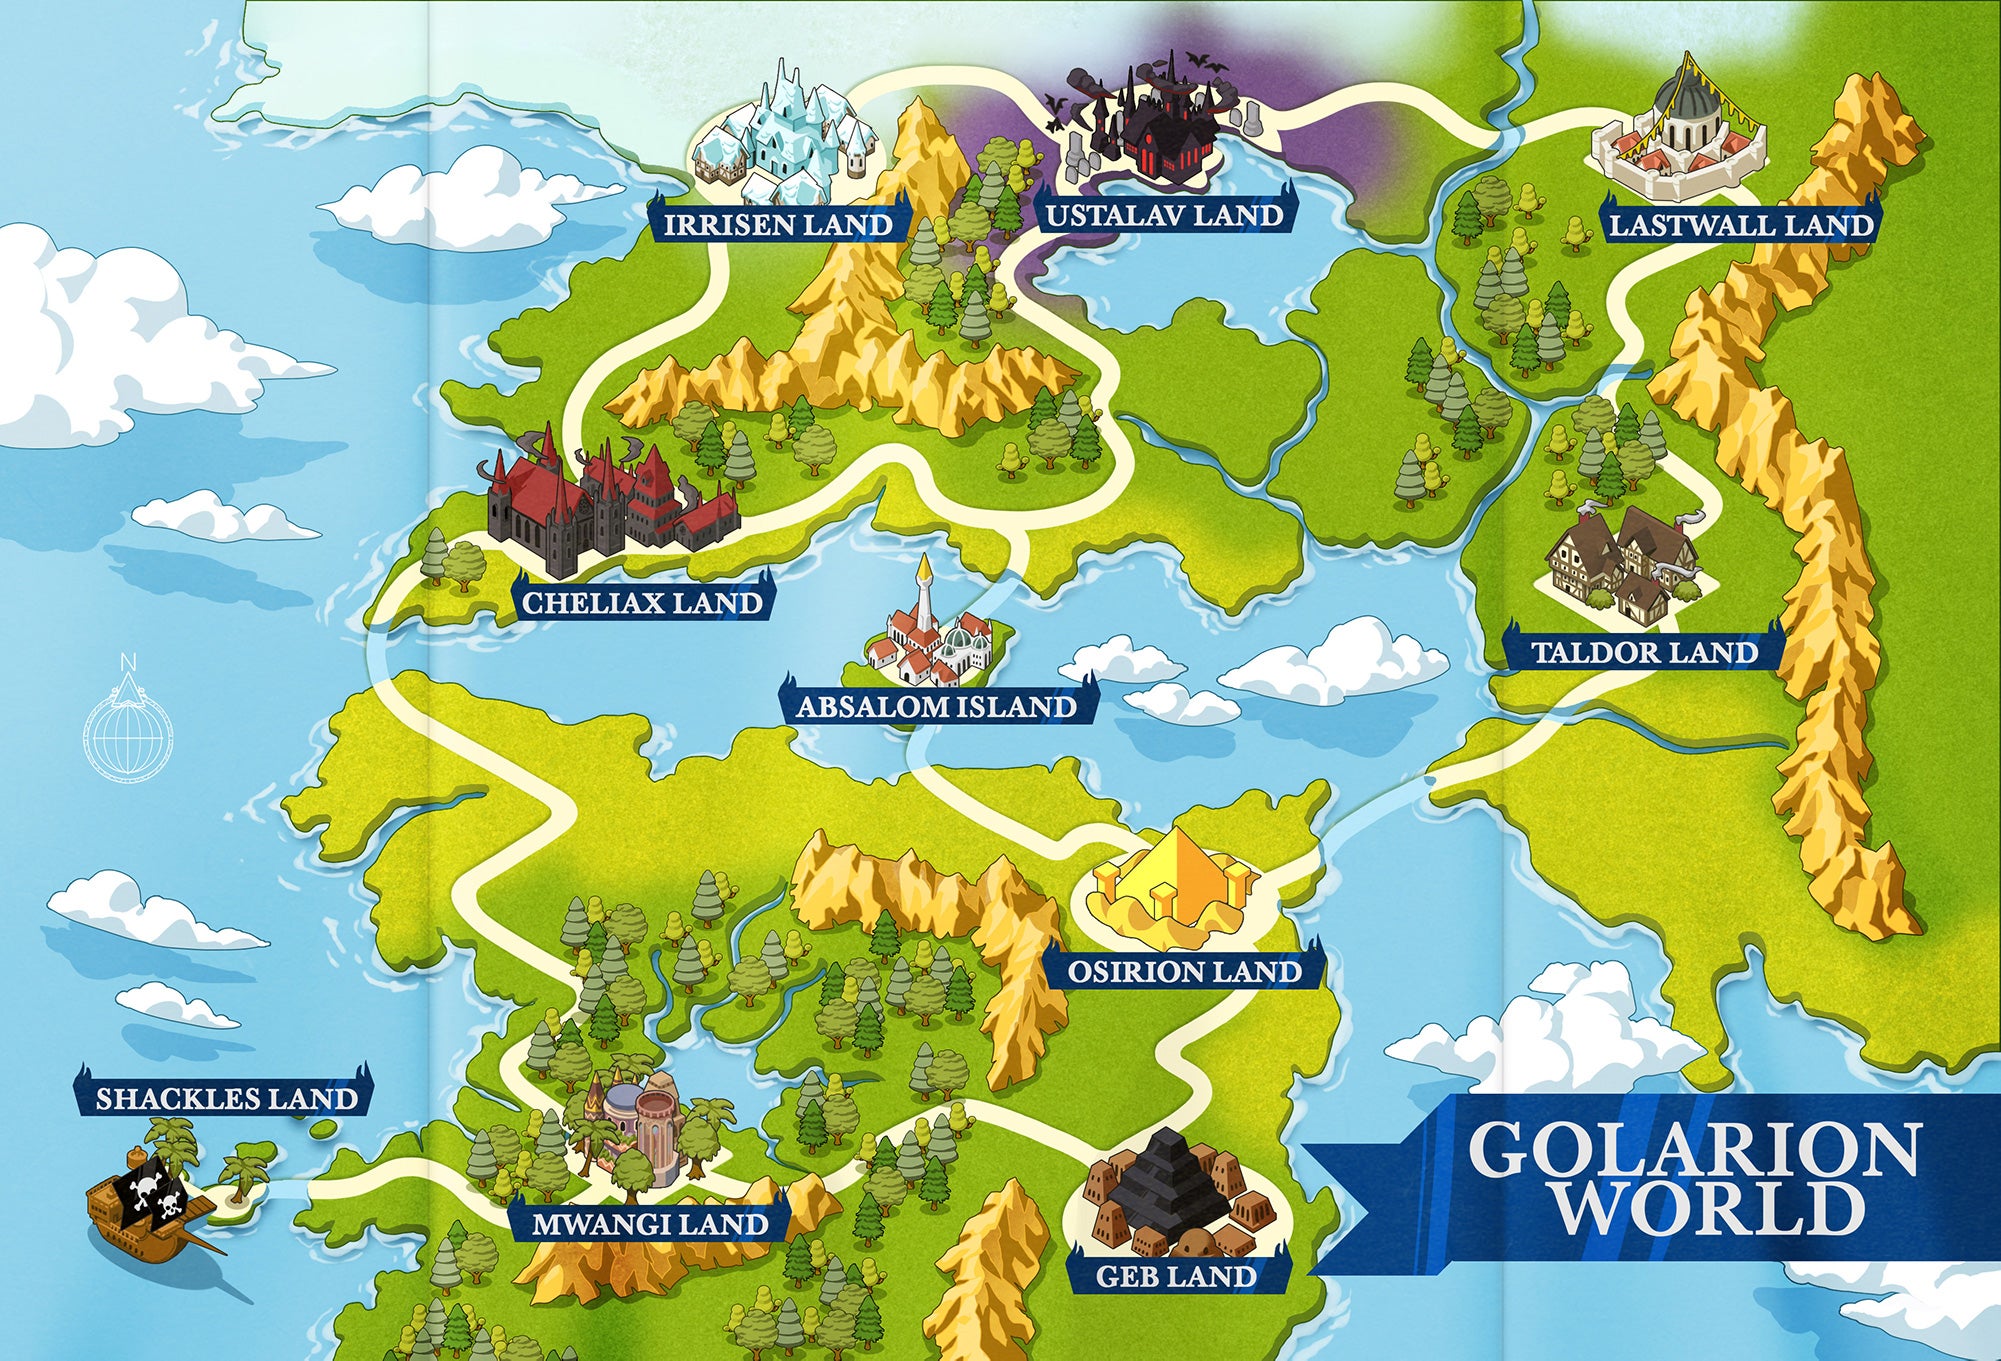 A theme park map of Golarion World.